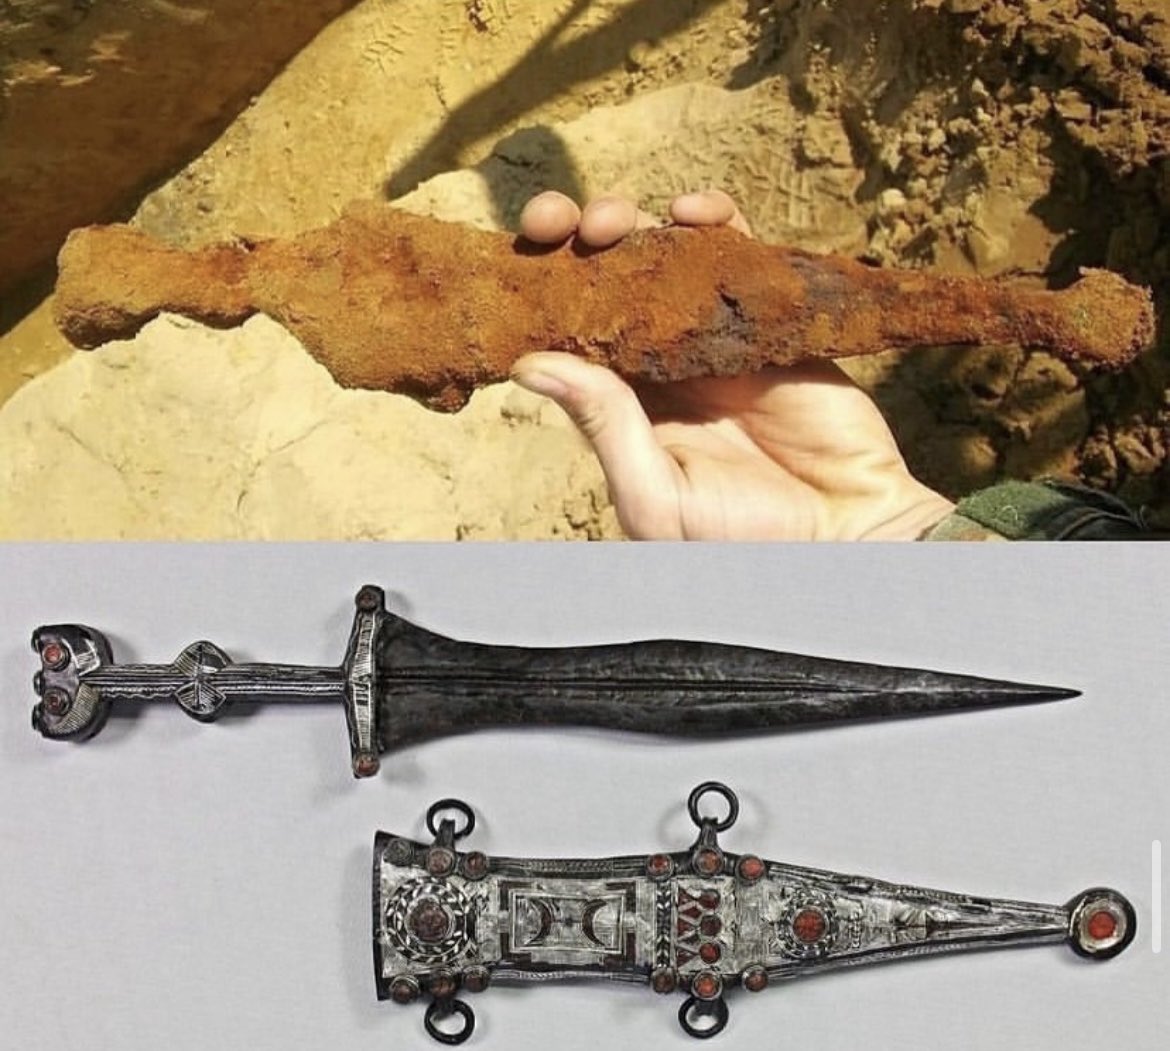 In 2019, a 2000-year-old silver dagger was discovered by a young archaeology intern named Nico Calman in Germany. The dagger was found in the grave of a soldier at the archaeological site of Haltern am See, near the borders of the Roman Empire, where a large military base once